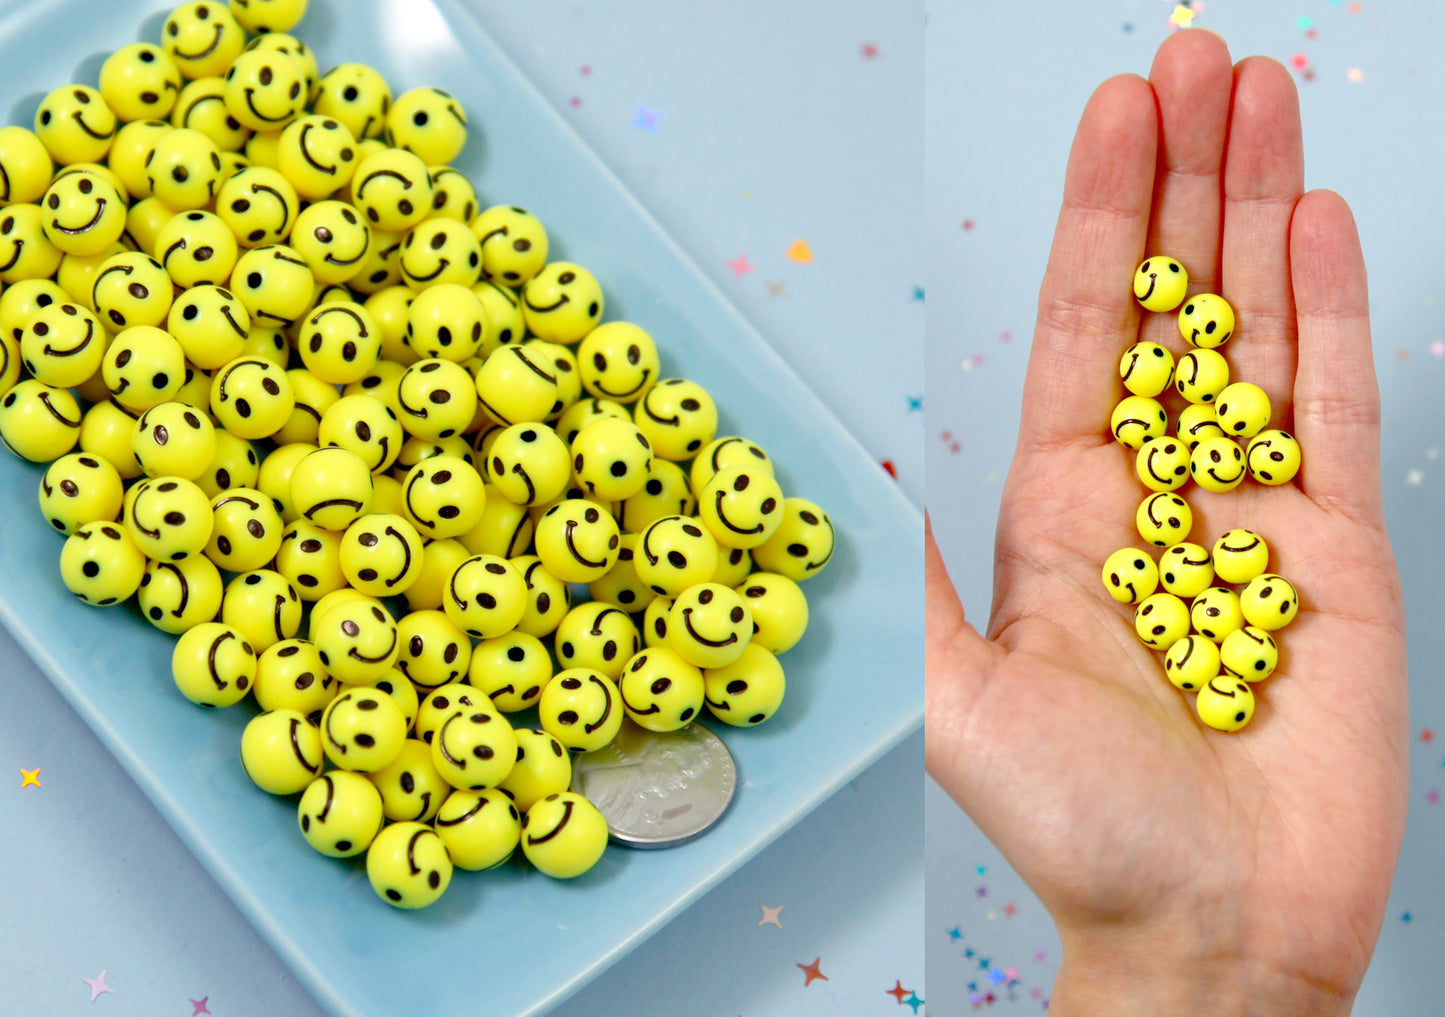 Happy Face Beads - 9mm Round Smile Shape Happy Face Beads Acrylic or Resin Beads - 100 pc set